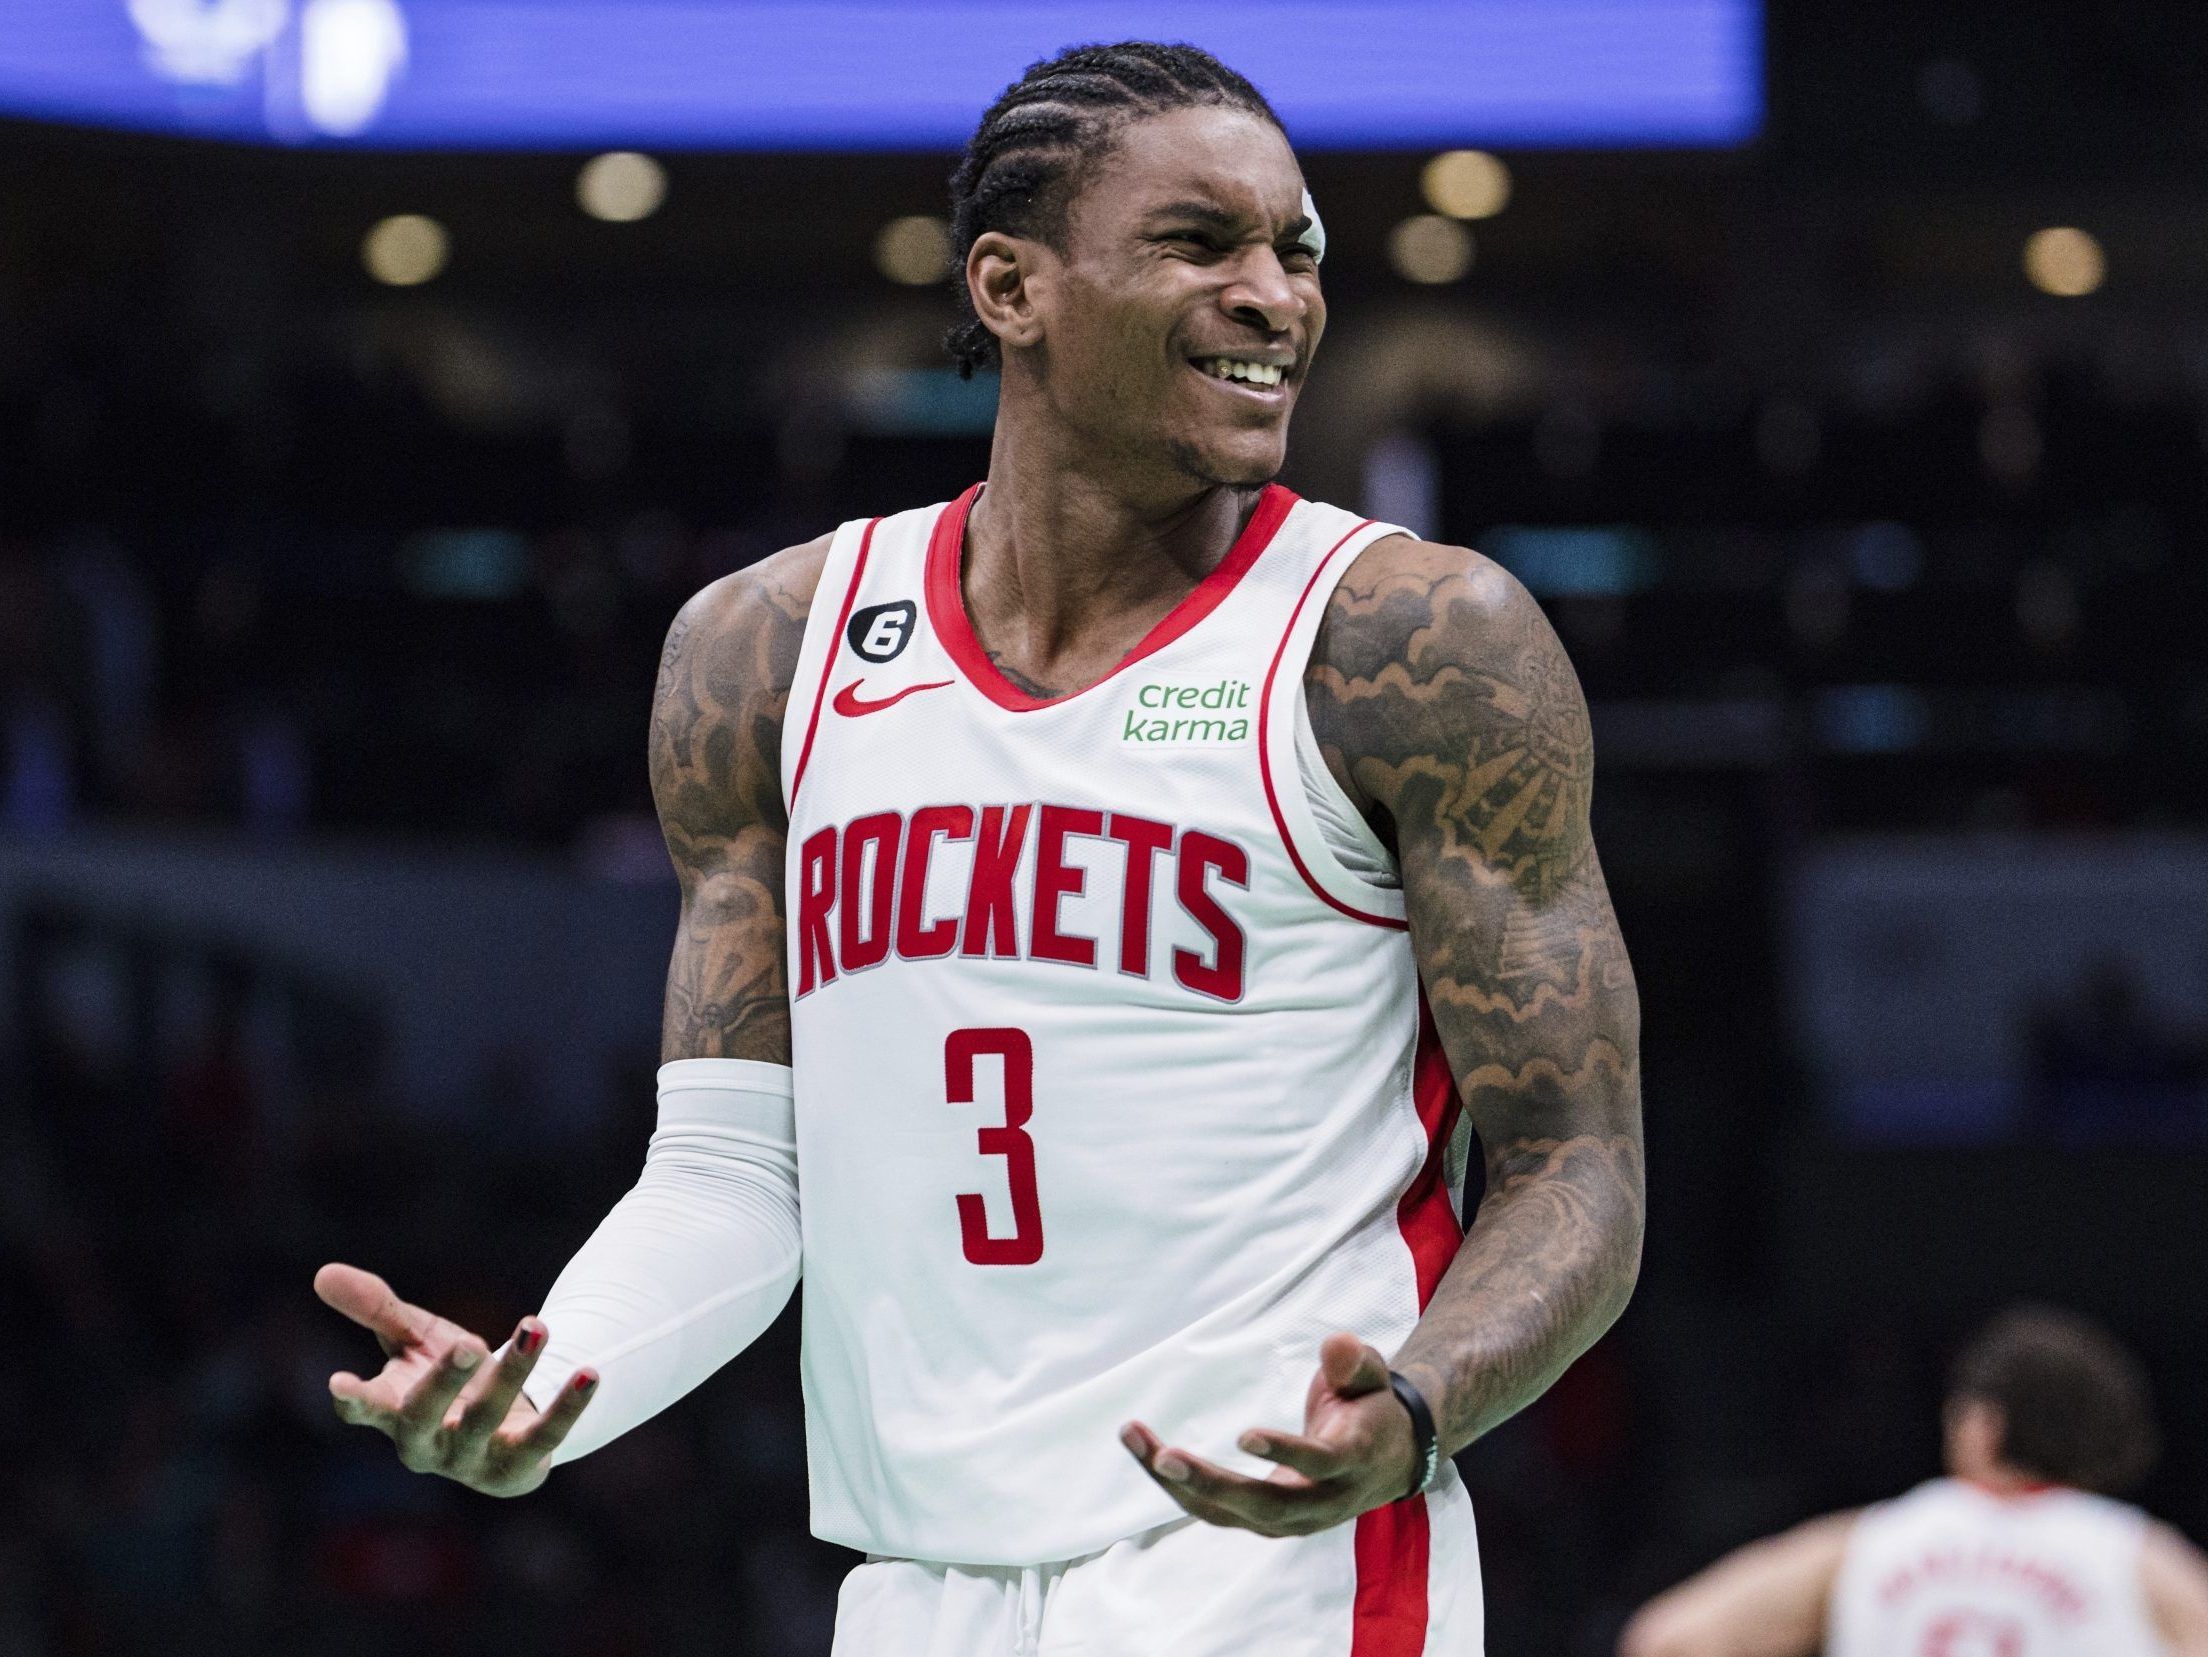 Drawing room drama: Behind the scenes with the Rockets at the NBA